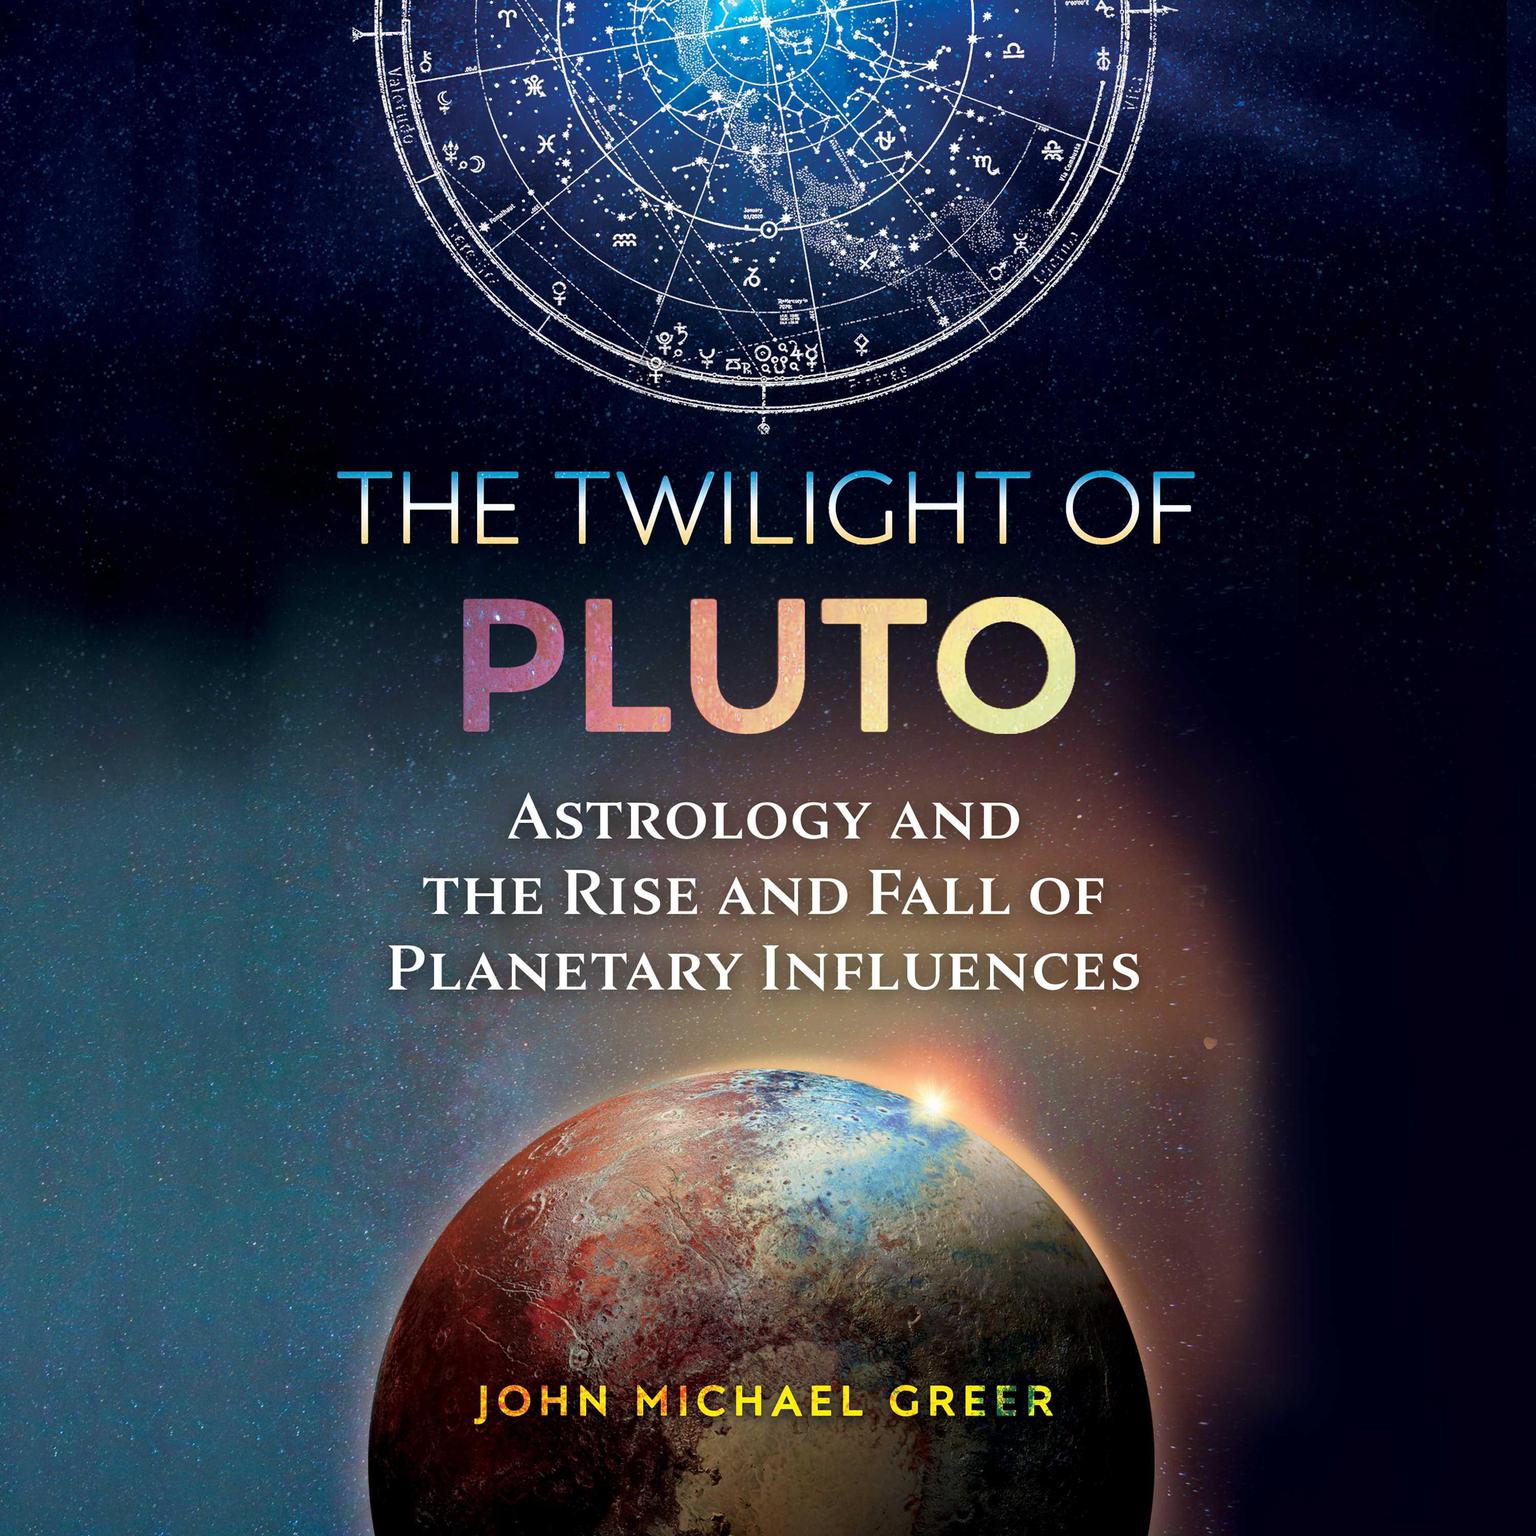 The Twilight of Pluto: Astrology and the Rise and Fall of Planetary Influences Audiobook, by John Michael Greer